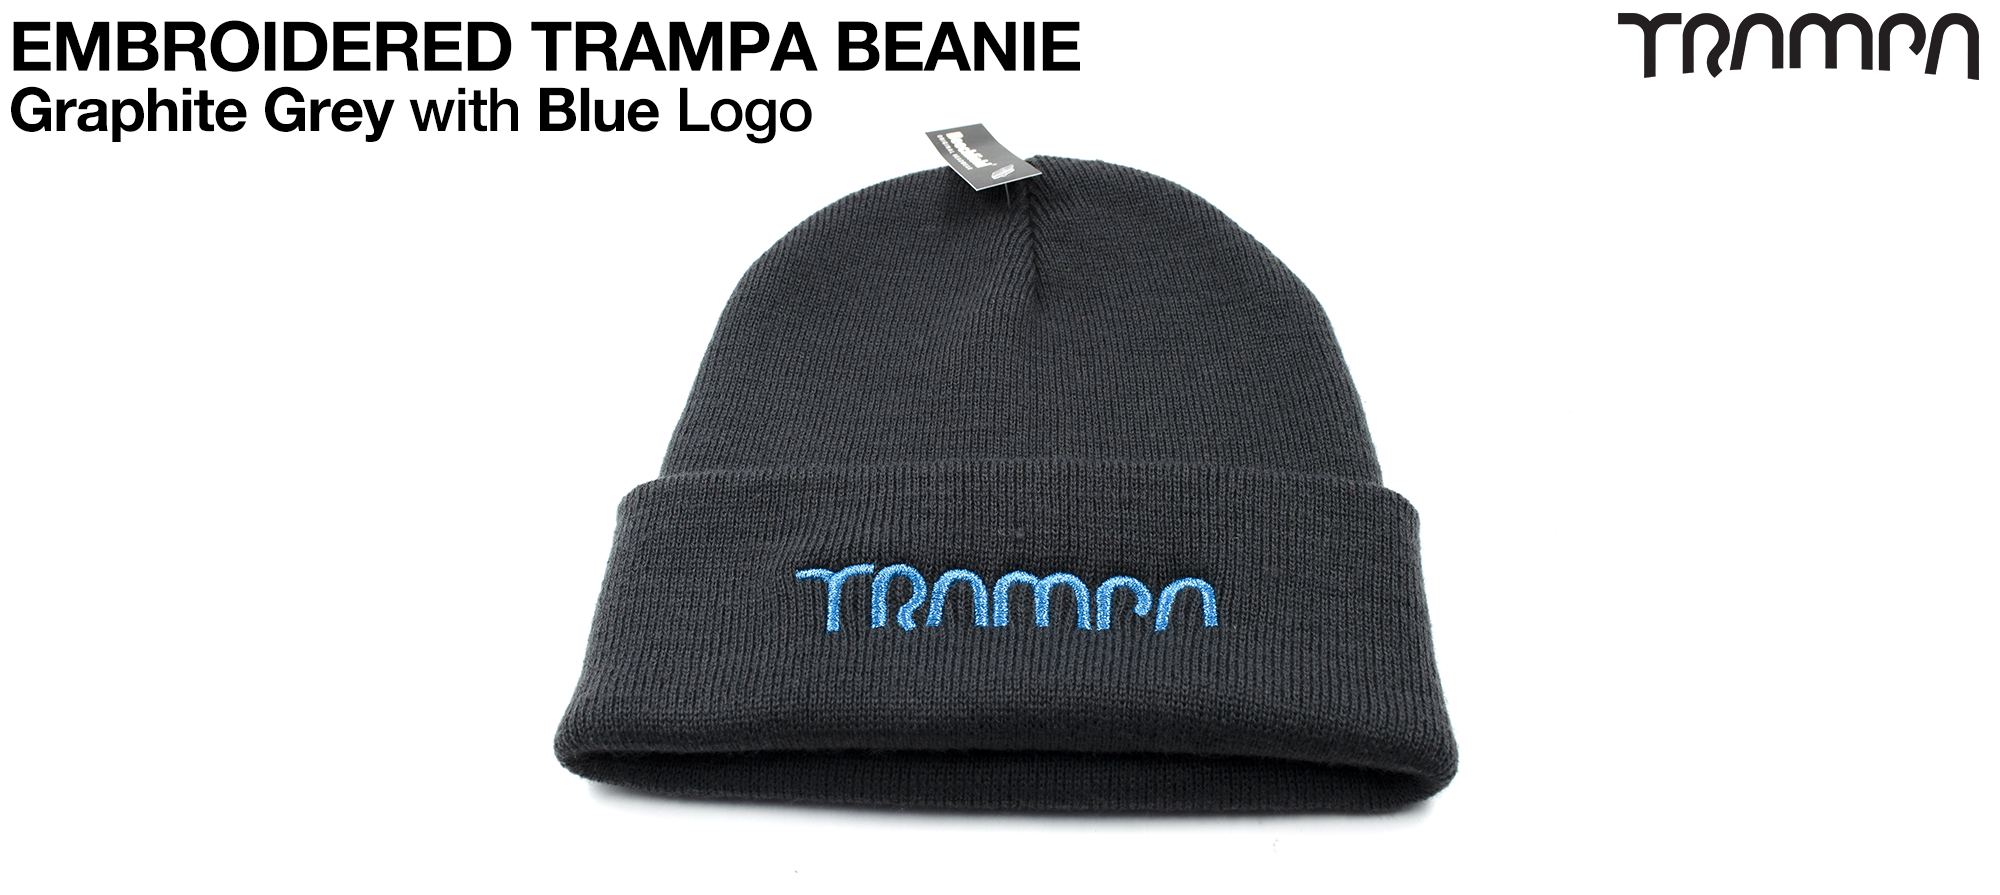 Graphite GREY Beanie with Electric BLUE TRAMPA logo